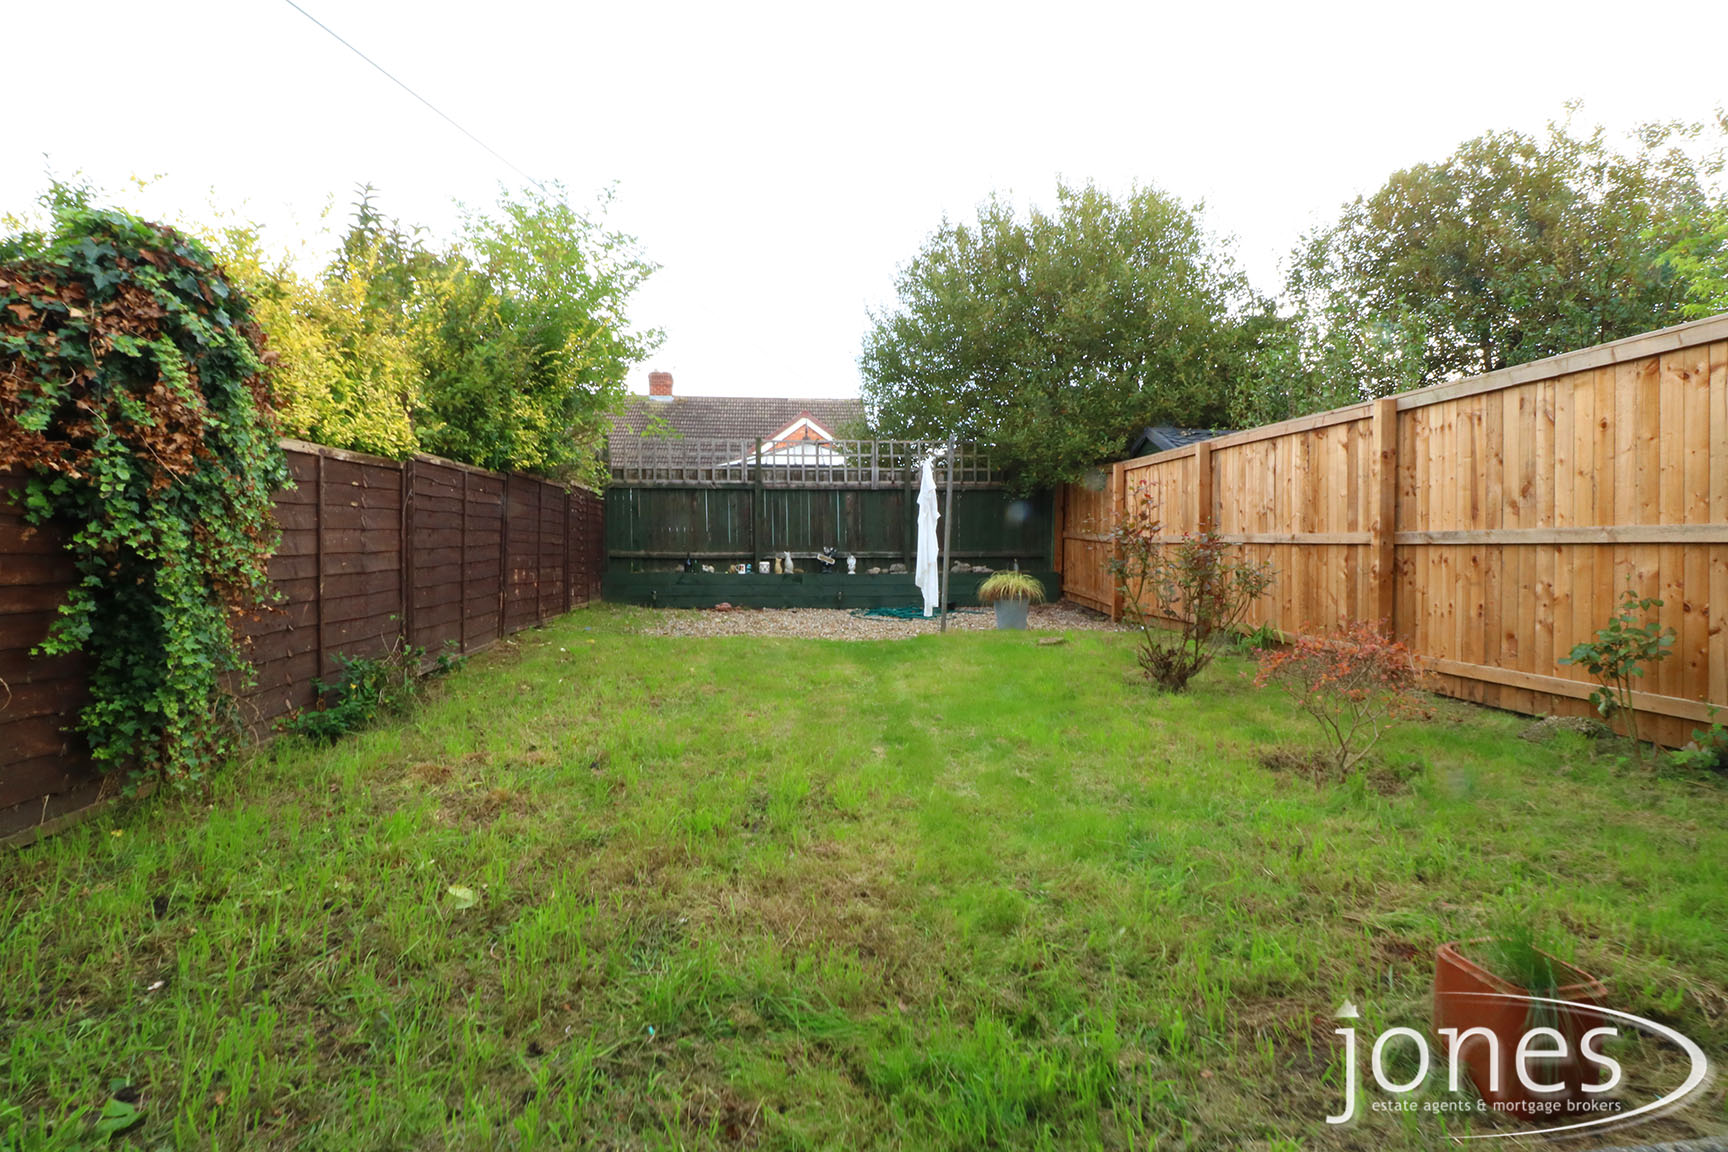 Home for Sale Let - Photo 10 Keithlands Avenue, Norton, Stockton on Tees, TS20